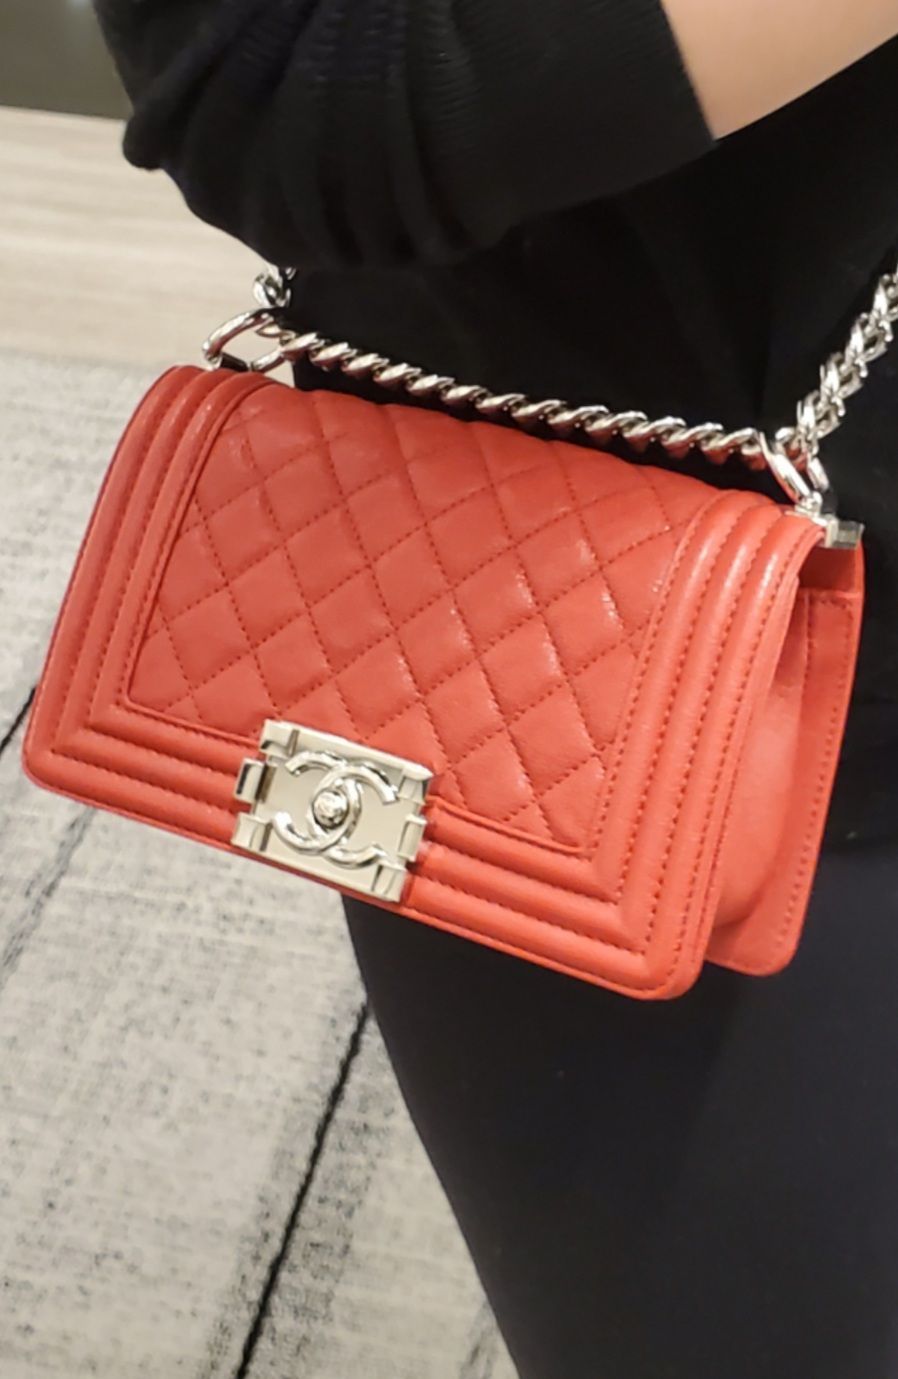 Ive never purchased a Chanel bag before & I'm curious. Apologies if there  are dumb questions, Do you look online for a specific bag before purchasing  it in store? If yes, is